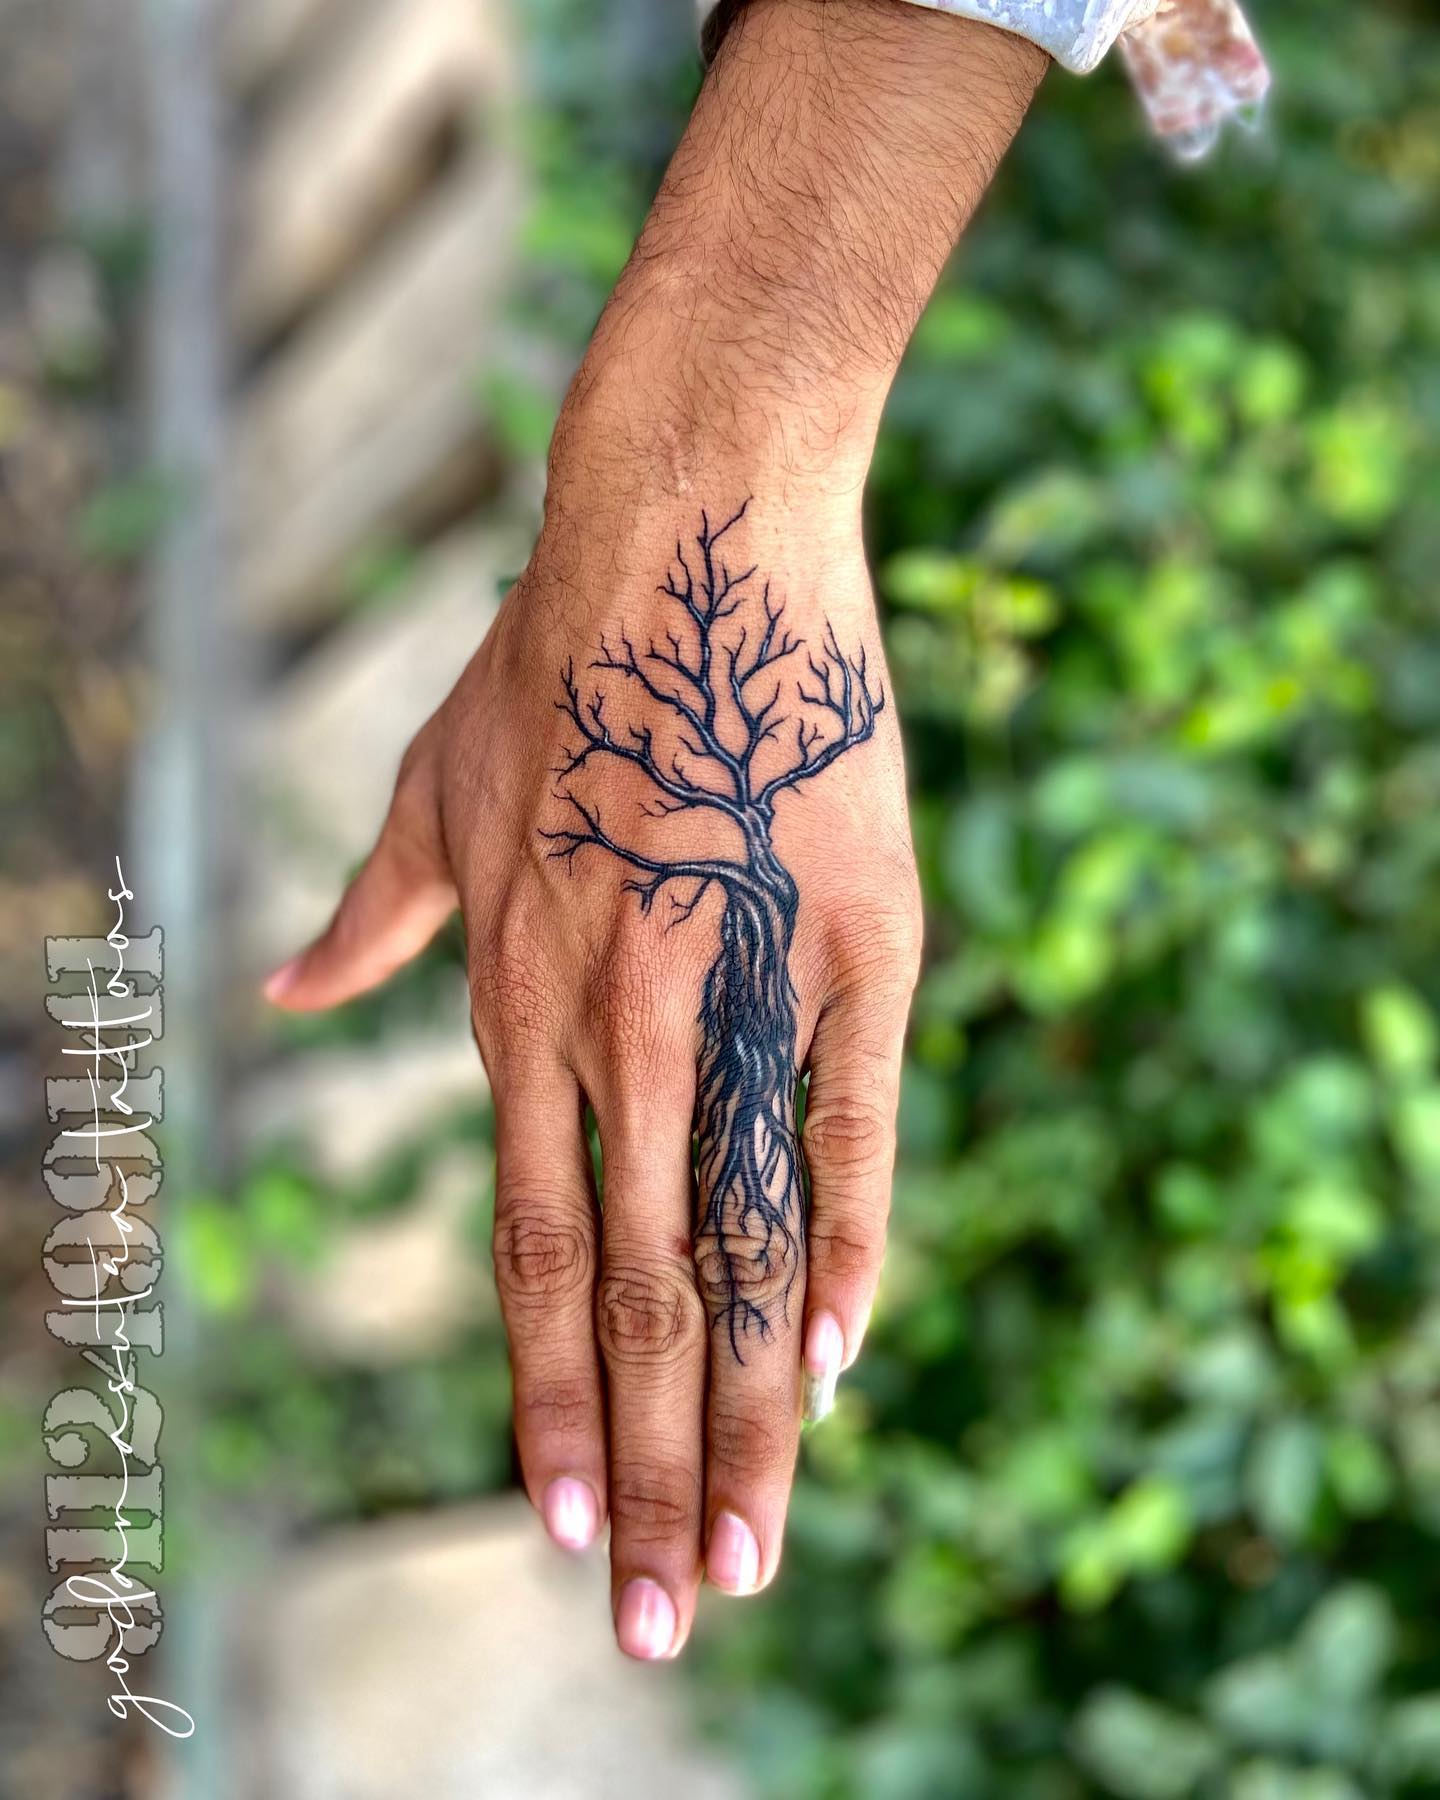 25 Intricate Tree Tattoos for Men  Small hand tattoos Tree tattoo men  Hand tattoos for guys